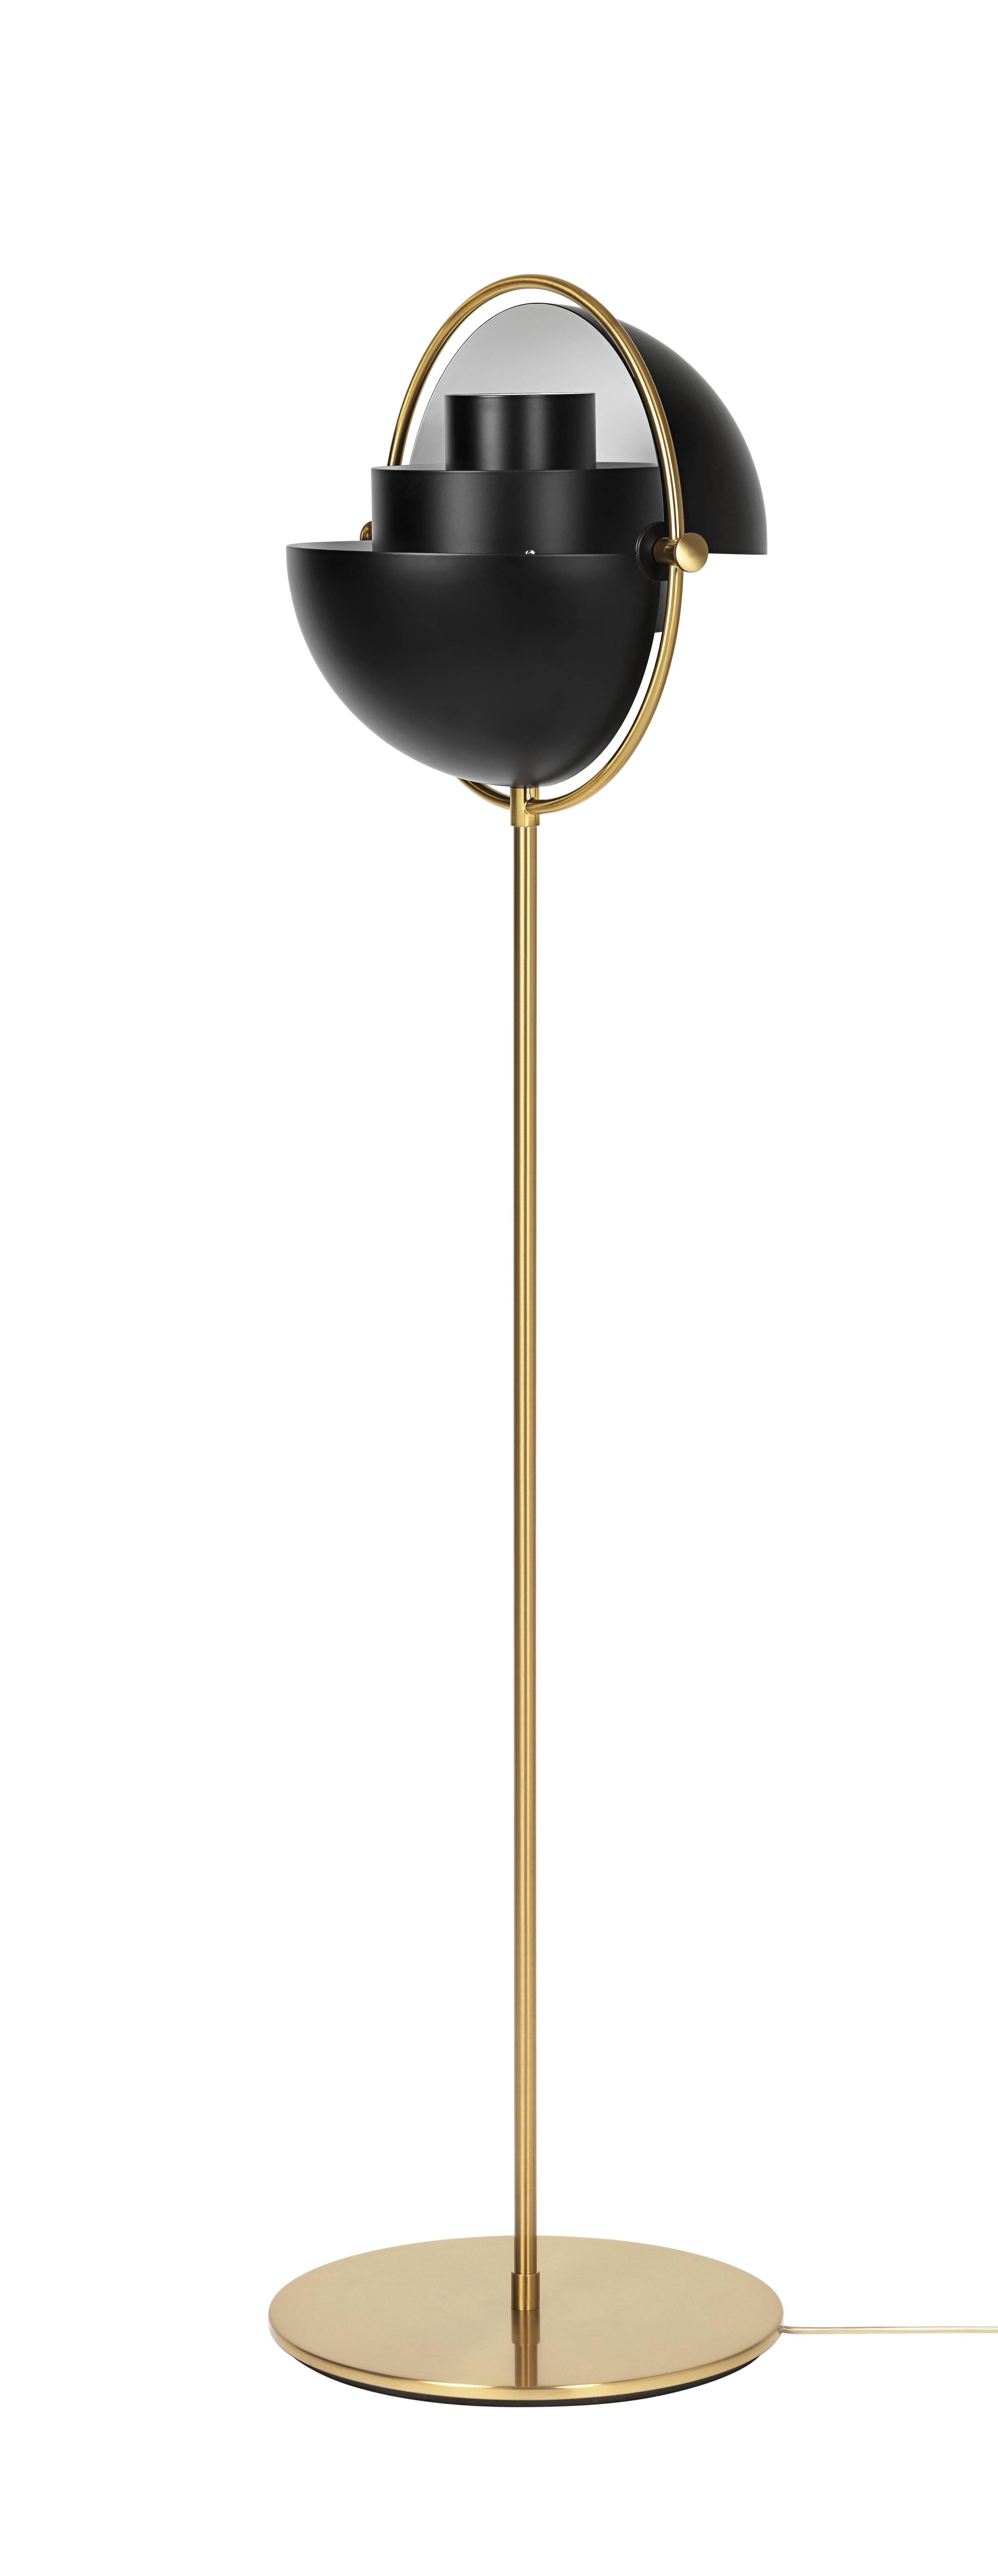 Brass Multi-Light floor lamp, Louis Weisdorf

Dimensions: 148 x 36 x 36 cm
Material: Brass
Designer: Louis Weisdorf
Produced by Gubi in Denmark

The Multi-Lite Pendant embraces the golden era of Danish design with its characteristic shape of